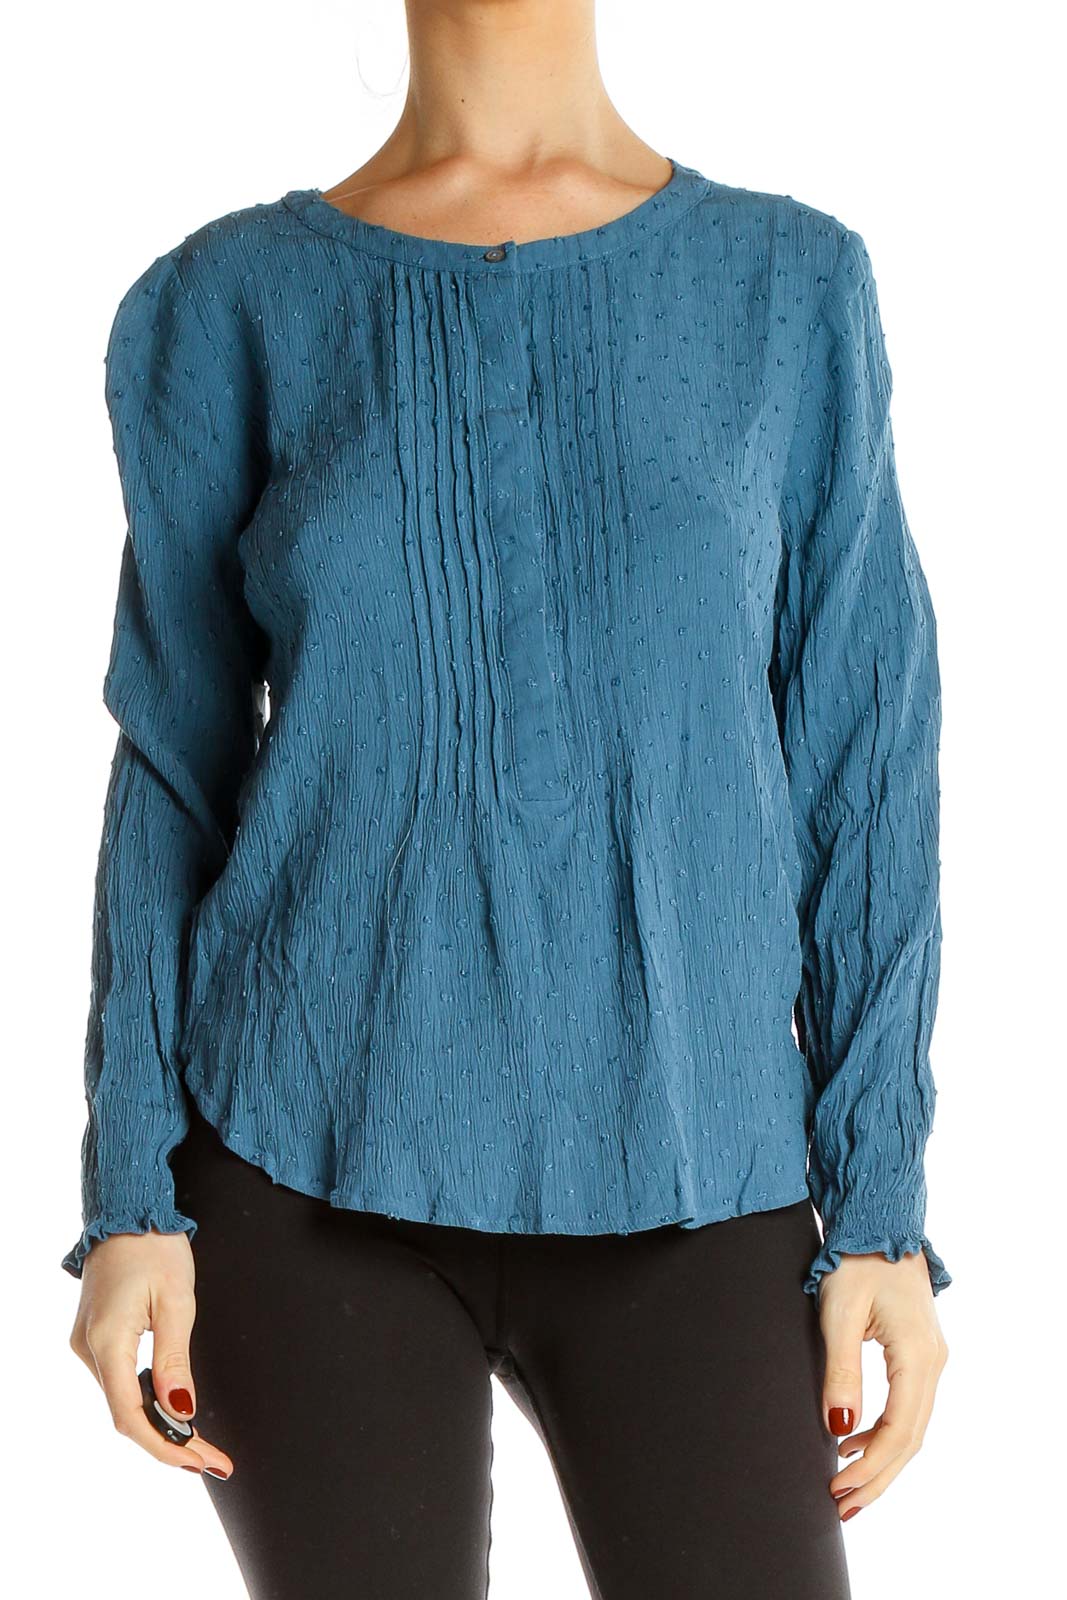 Blue Textured Blouse Front